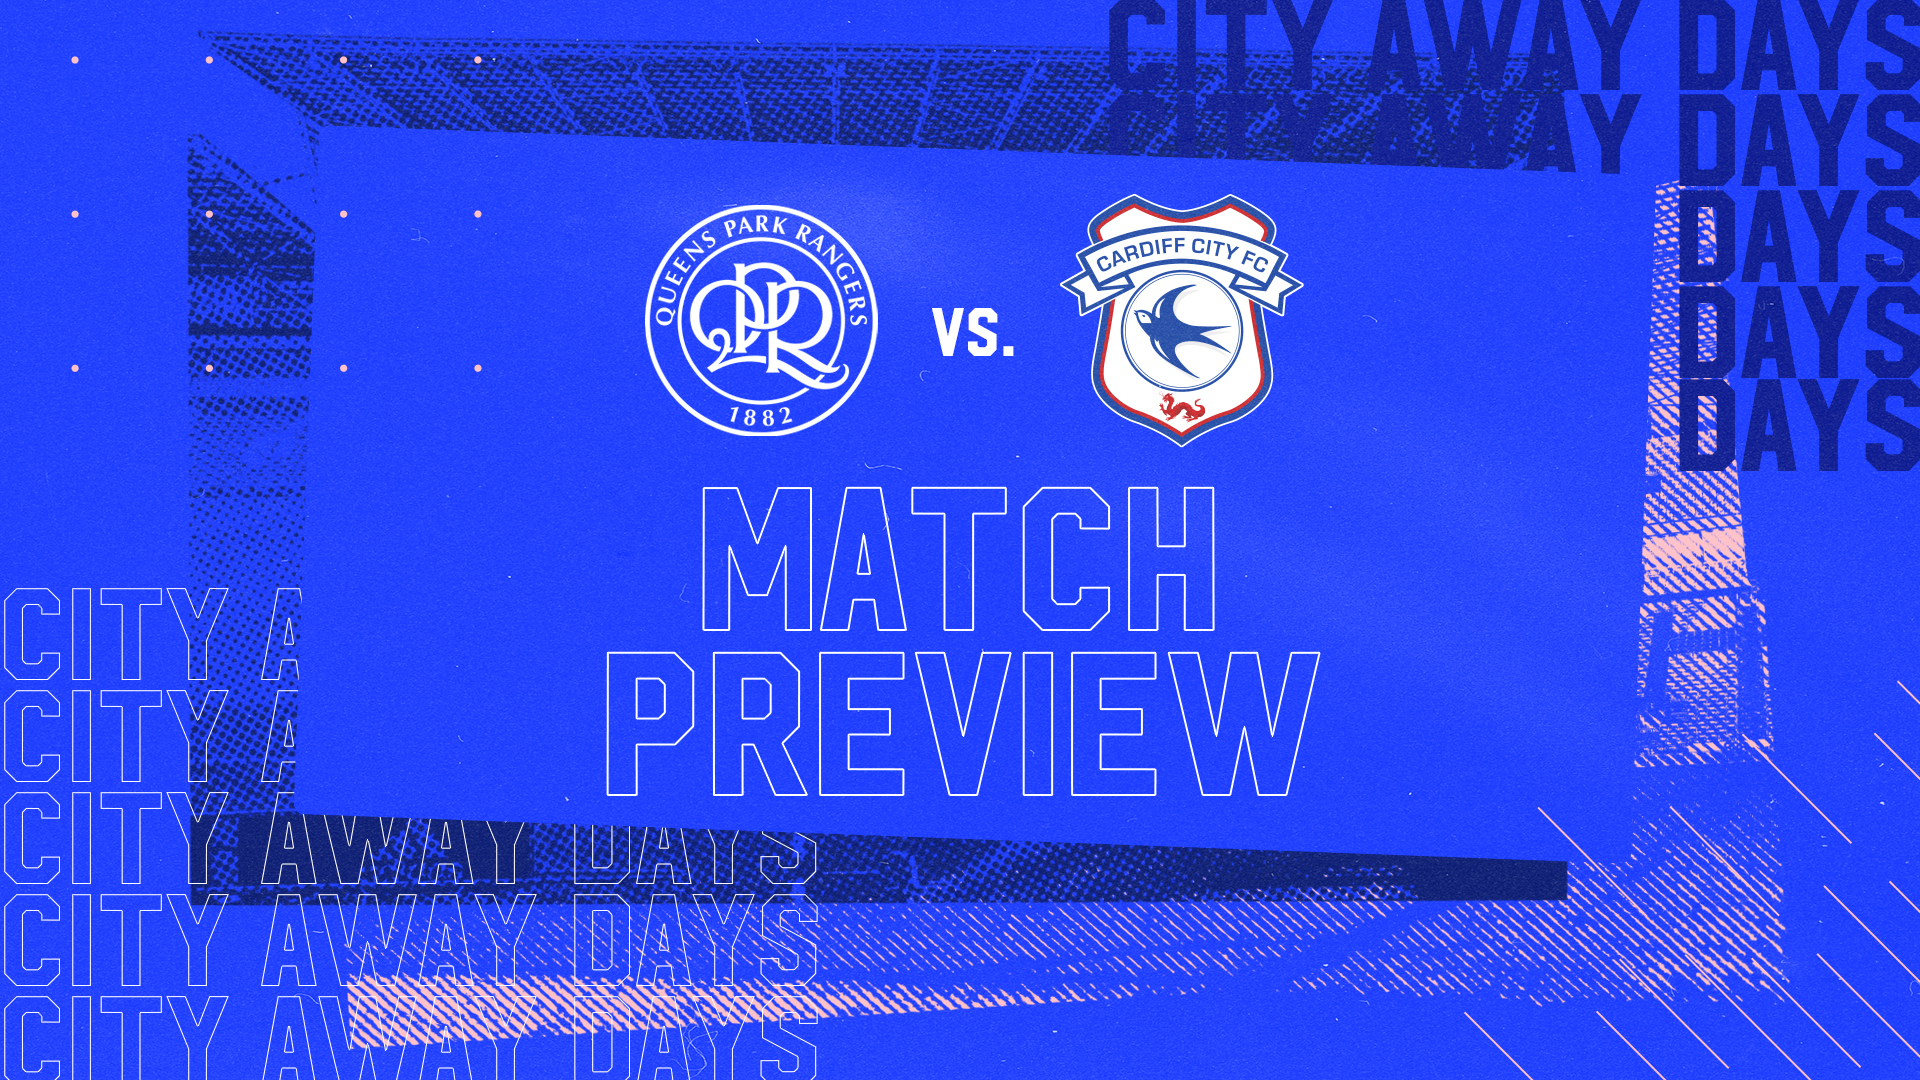 Match Preview - Queens Park Rangers vs. Cardiff City